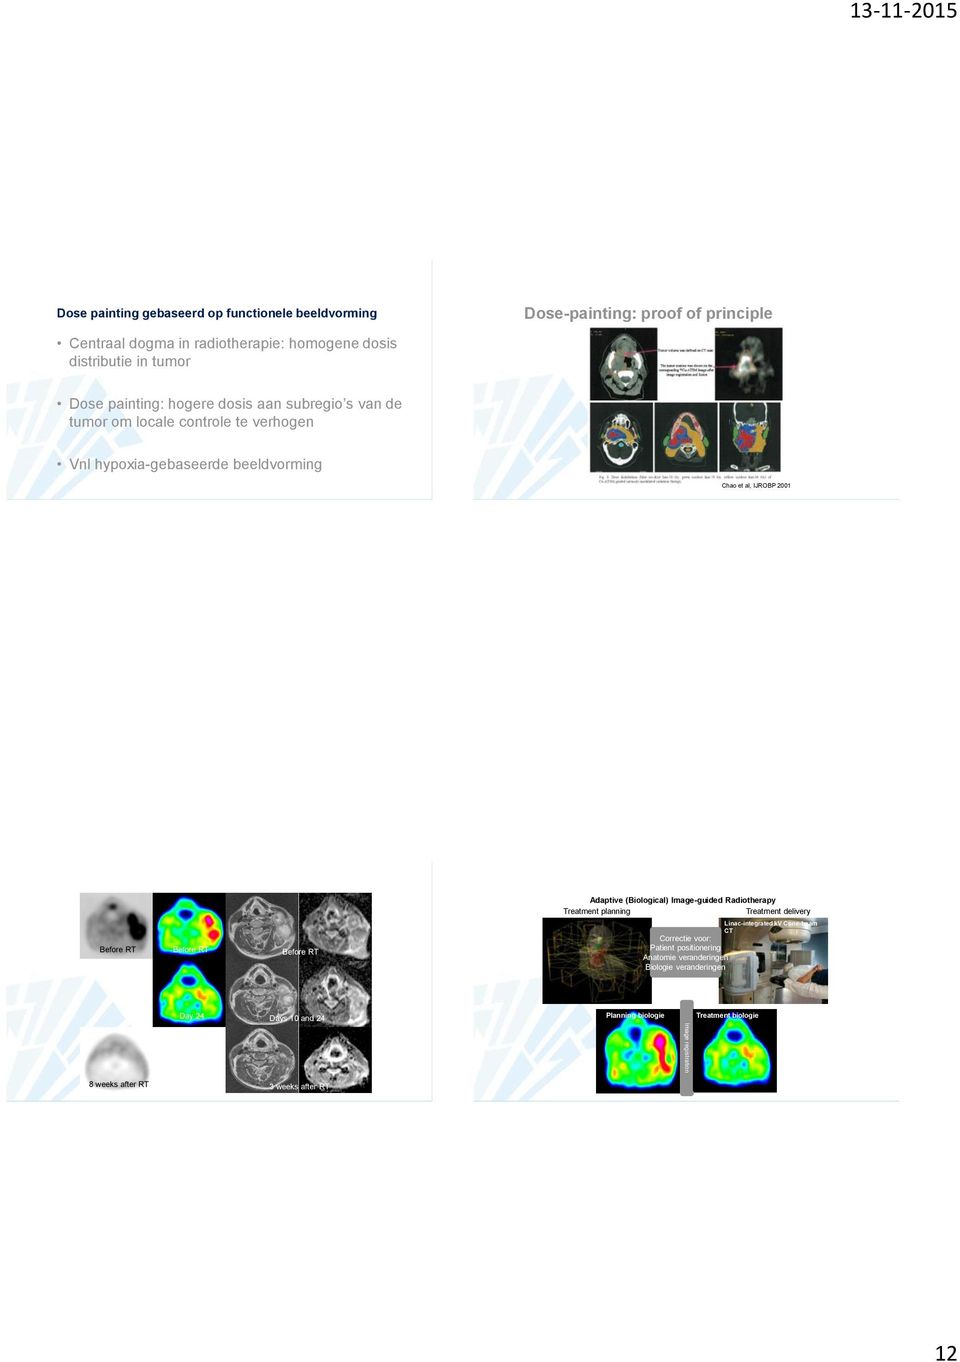 (Biological) Image-guided Radiotherapy Treatment planning Treatment delivery Before RT Before RT Before RT Linac-integrated kv Cone-beam CT Correctie voor: Patient